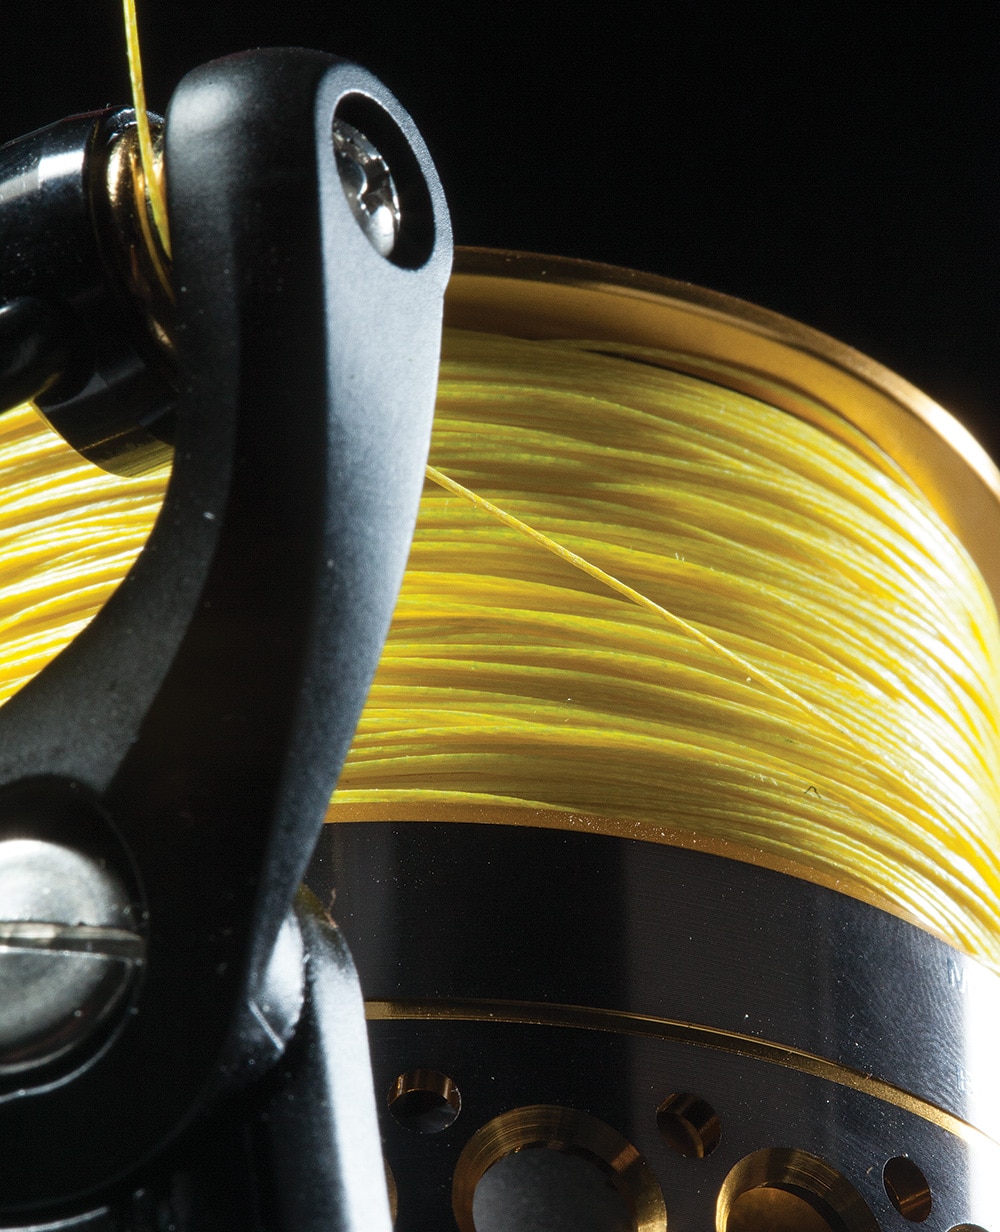 What LB test braided fishing line should I put on my size 6500